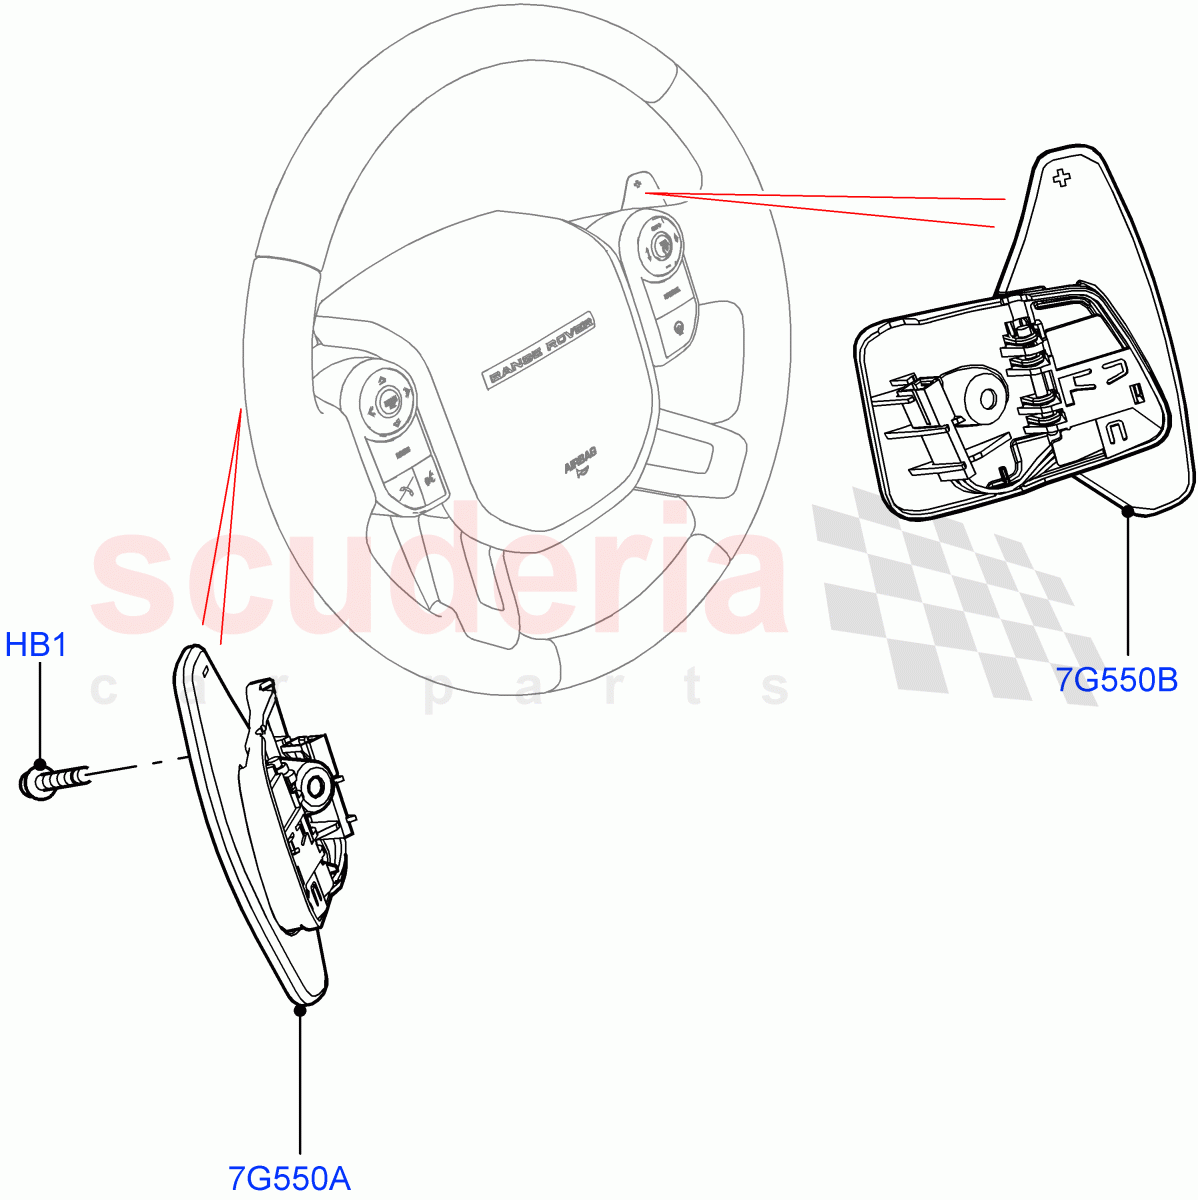 Gear Change-Automatic Transmission(Steering Wheel)(8 Speed Auto Trans ZF 8HP76,Paddle Shift,Paddle Shift - Noble,Paddle shift - Aluminium)((V)FROMKA000001) of Land Rover Land Rover Range Rover Sport (2014+) [4.4 DOHC Diesel V8 DITC]